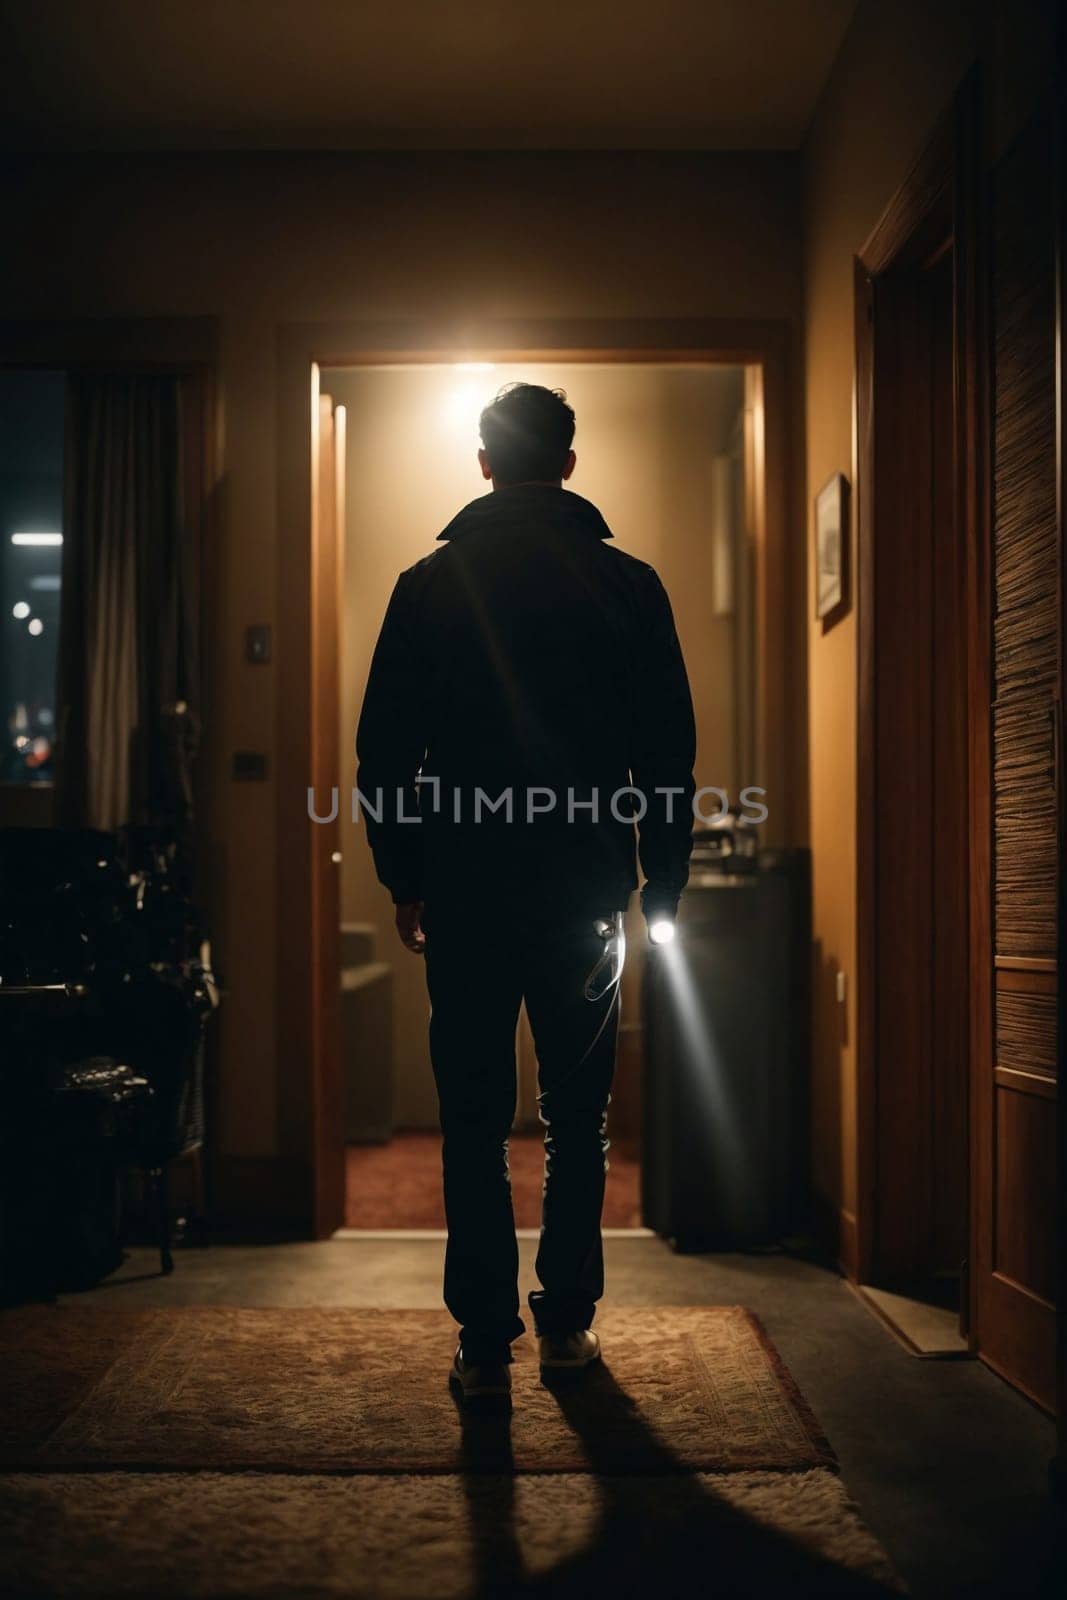 A solitary man stands in a dimly lit hallway, casting a long shadow as he pauses in contemplation.